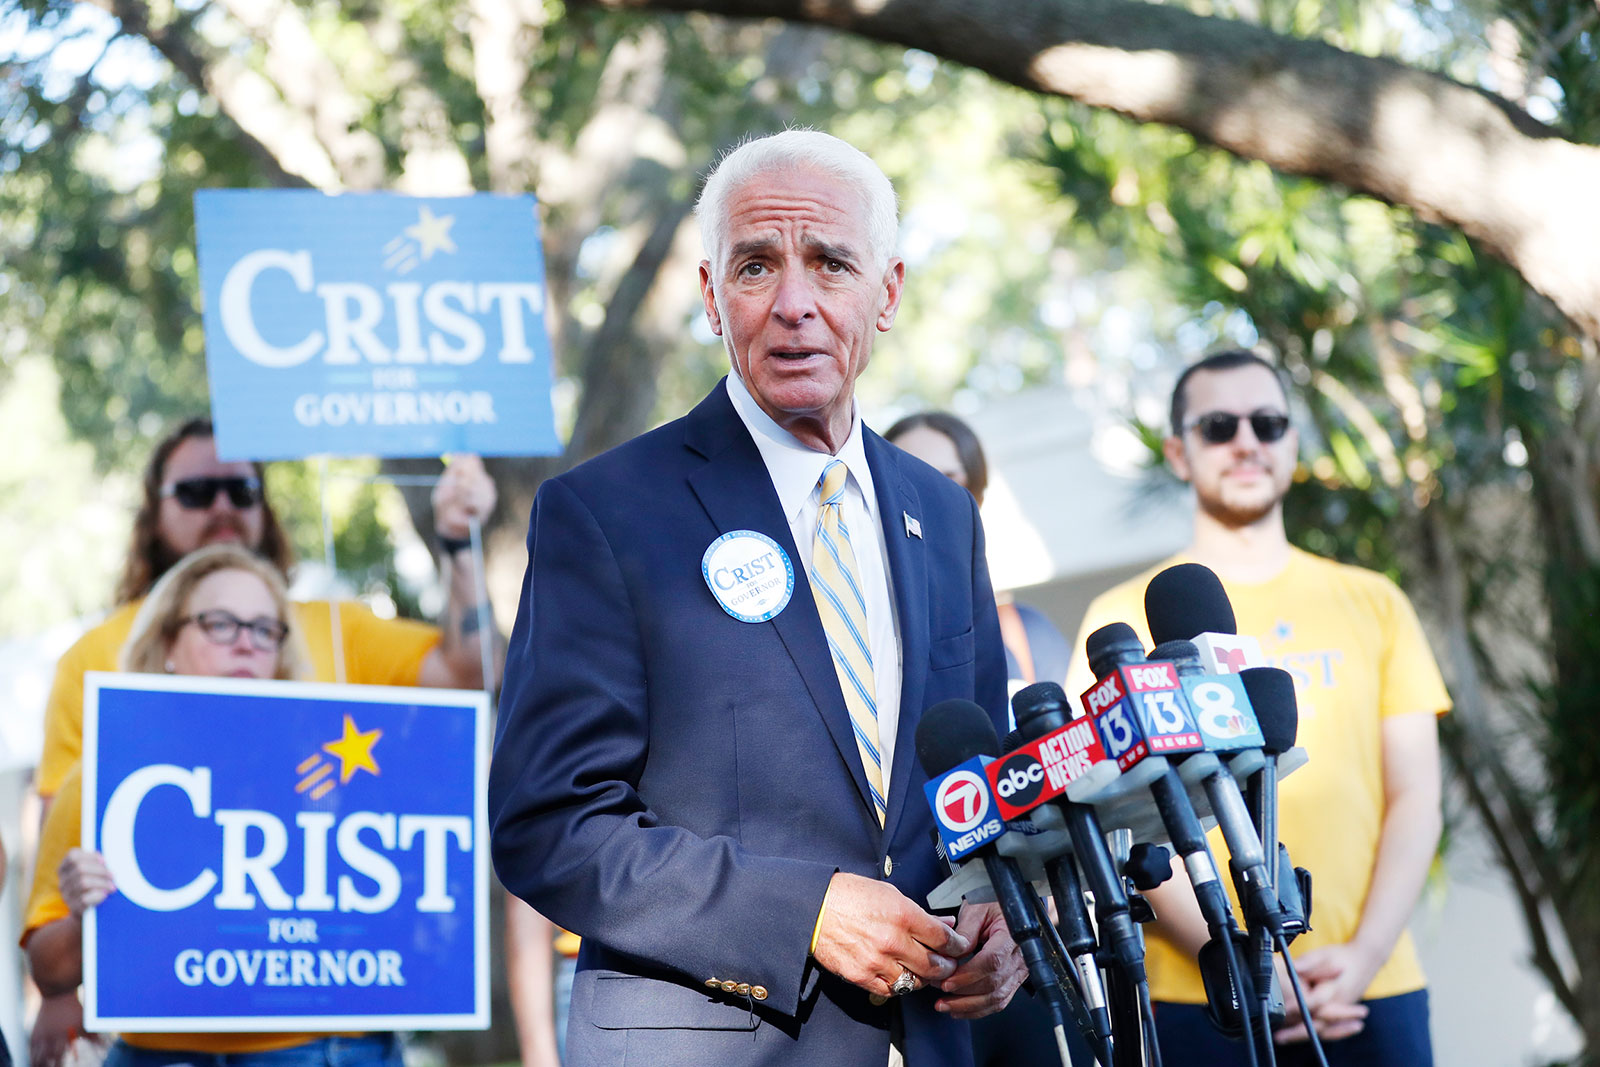 Florida gubernatorial candidate Rep. Charlie Crist speaks to the media before casting his vote in St. Petersburg, Florida, on Tuesday.